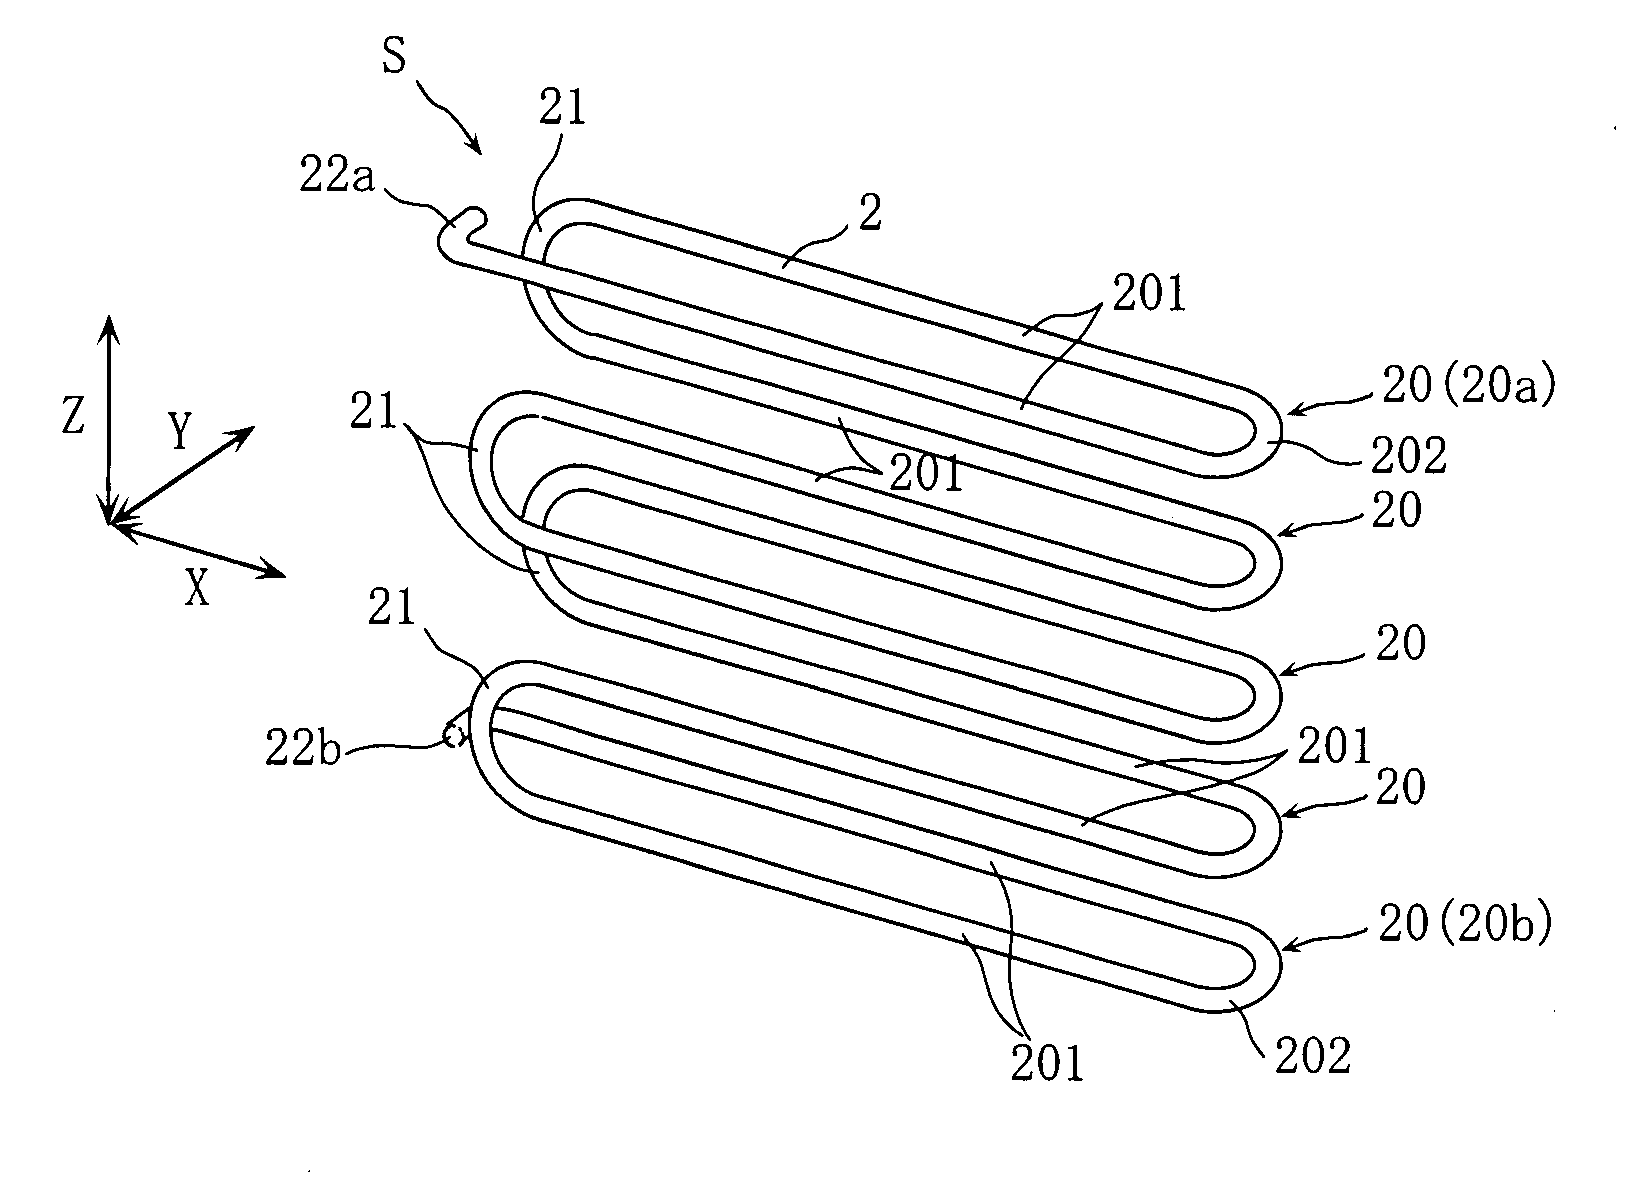 Tube spacer, method of manufacturing the same, and heat exchanger